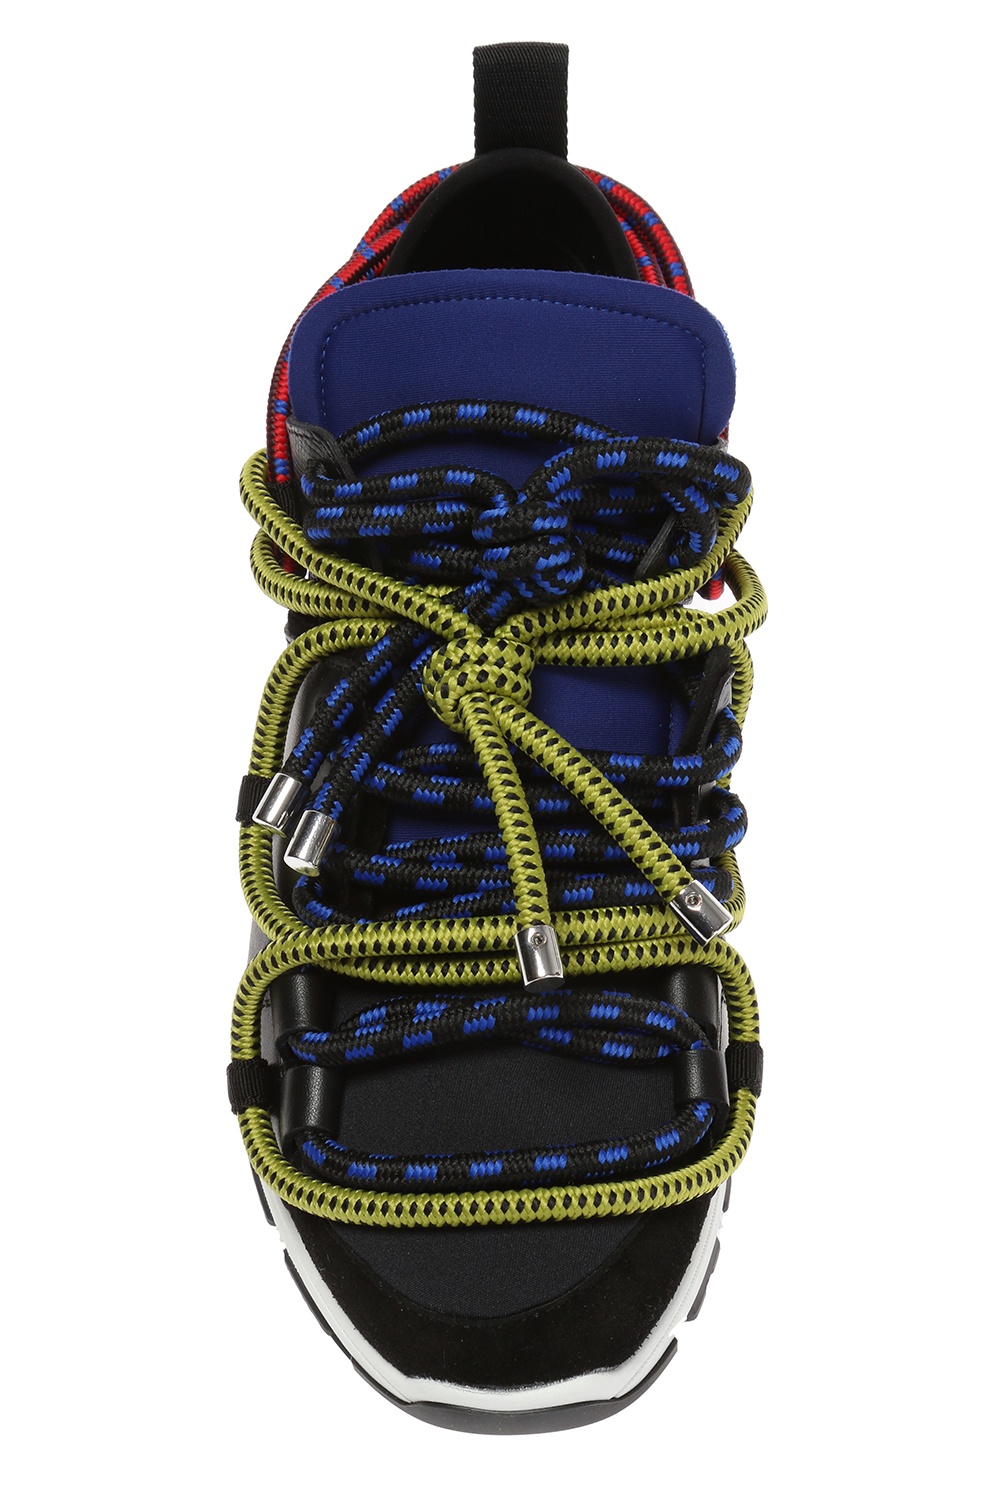 dsquared2 bungy sneakers